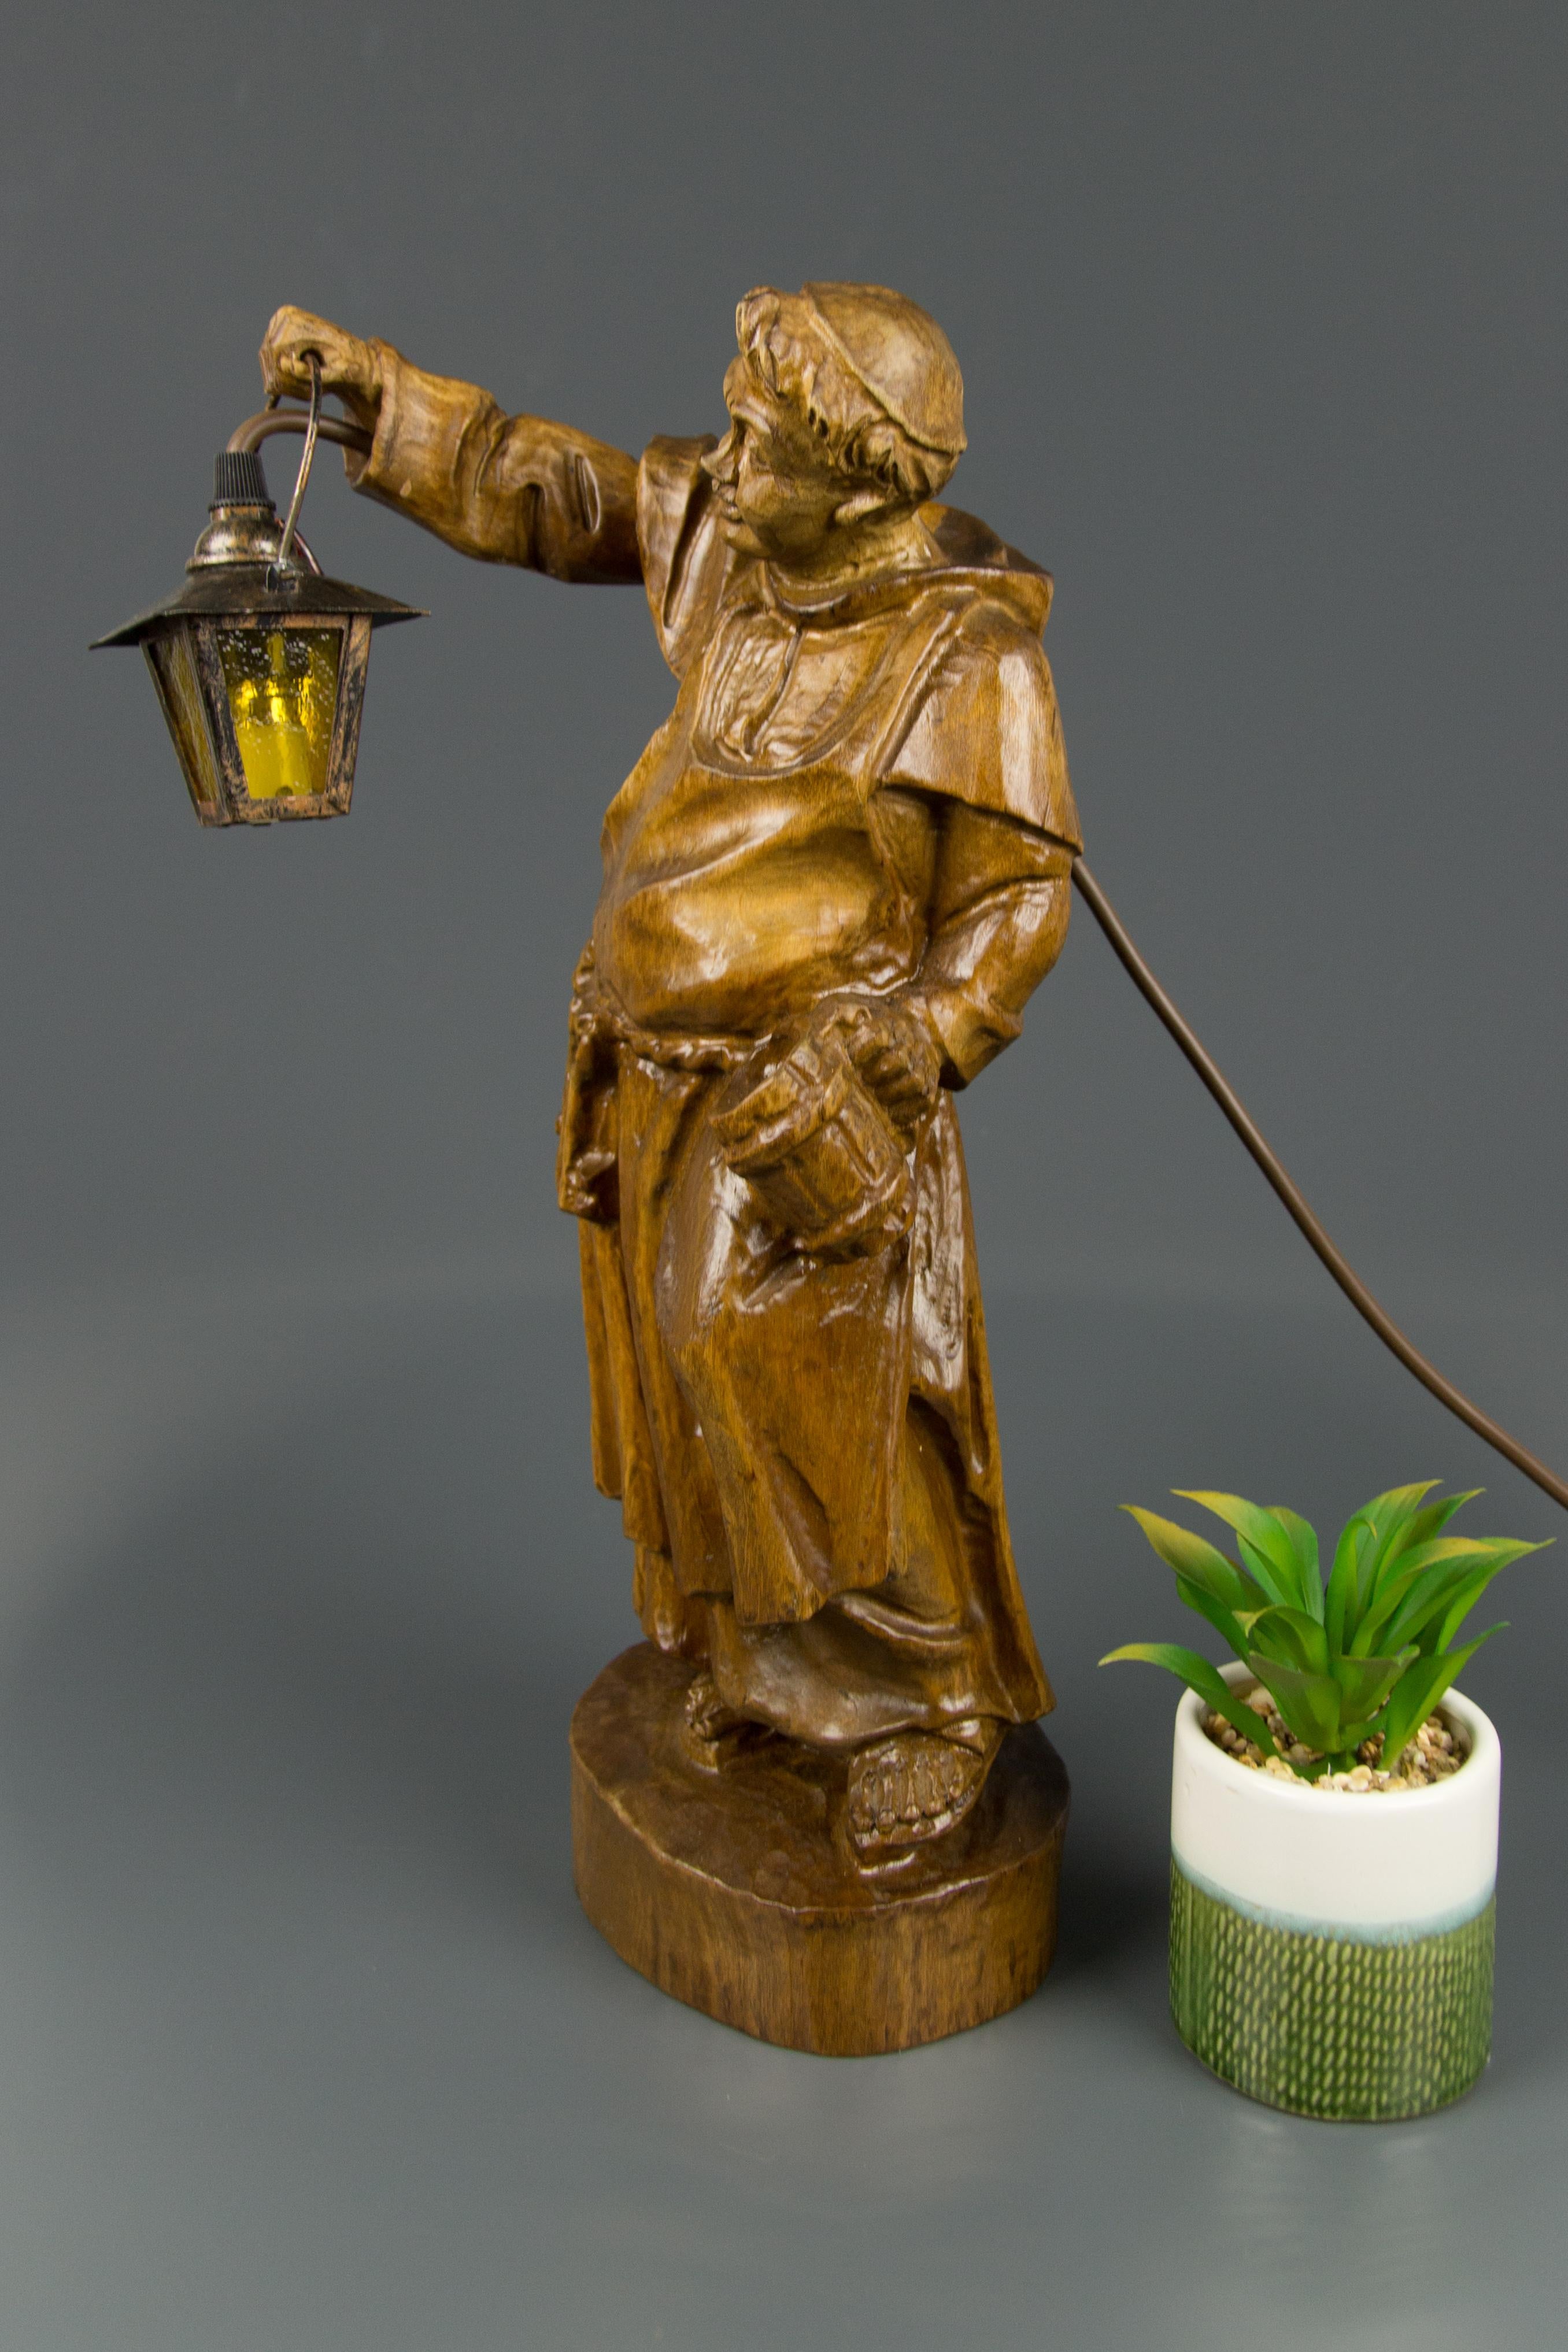 German Hand Carved Wooden Sculpture Figurative Lamp Monk with Lantern 1